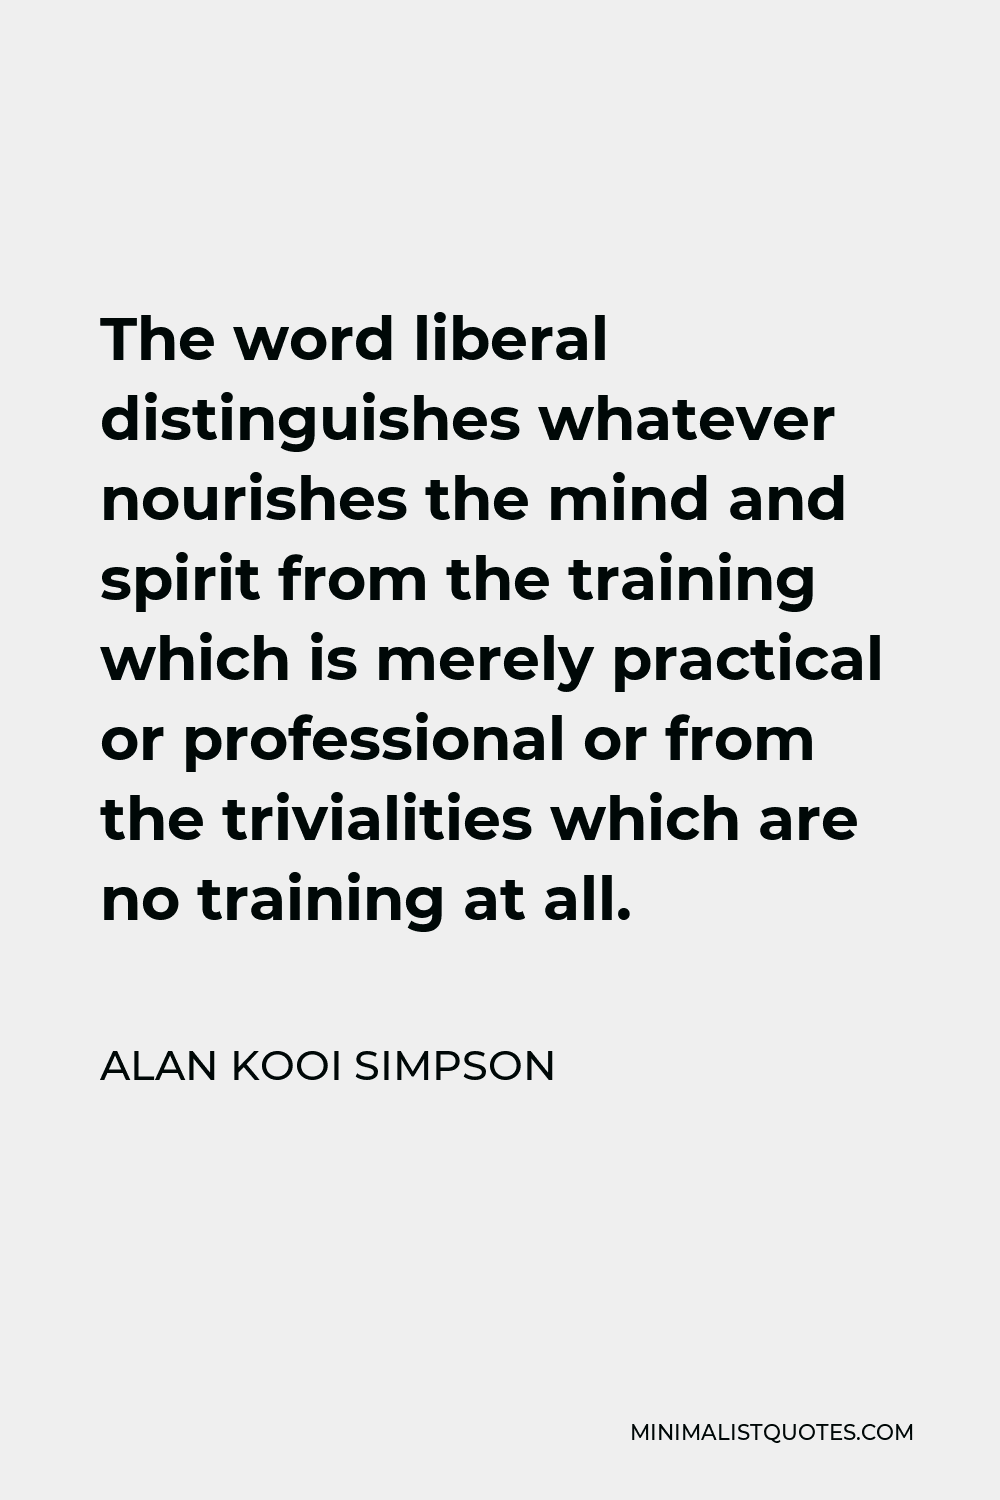 Alan Kooi Simpson Quote - The word liberal distinguishes whatever nourishes the mind and spirit from the training which is merely practical or professional or from the trivialities which are no training at all.